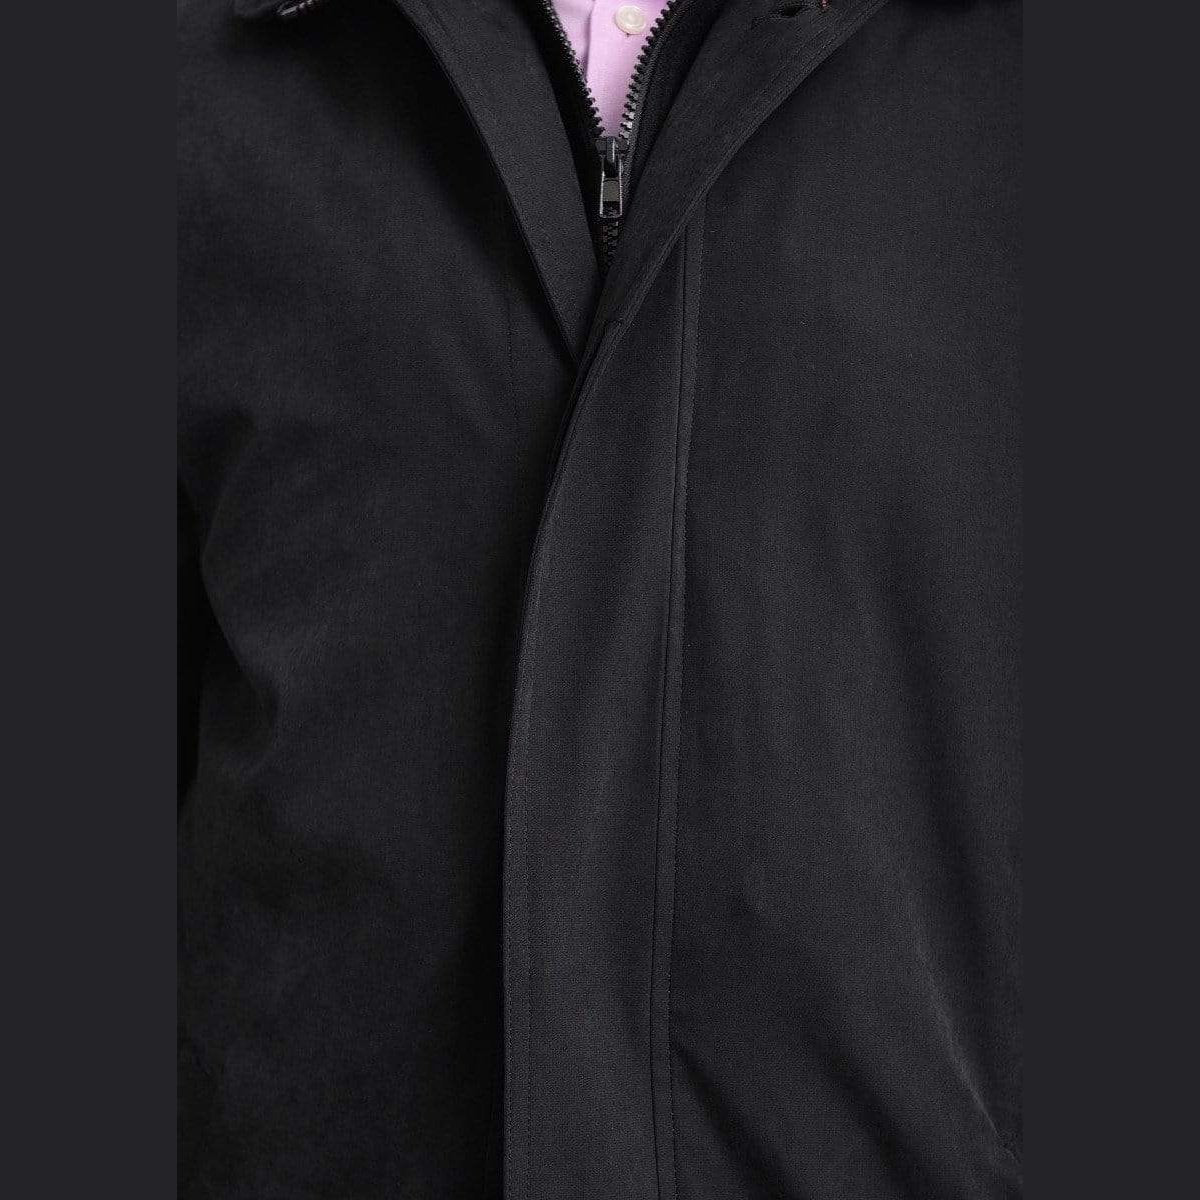 Men's Rain-proof Iconic Black Trench Coat Jacket With Removable Liner